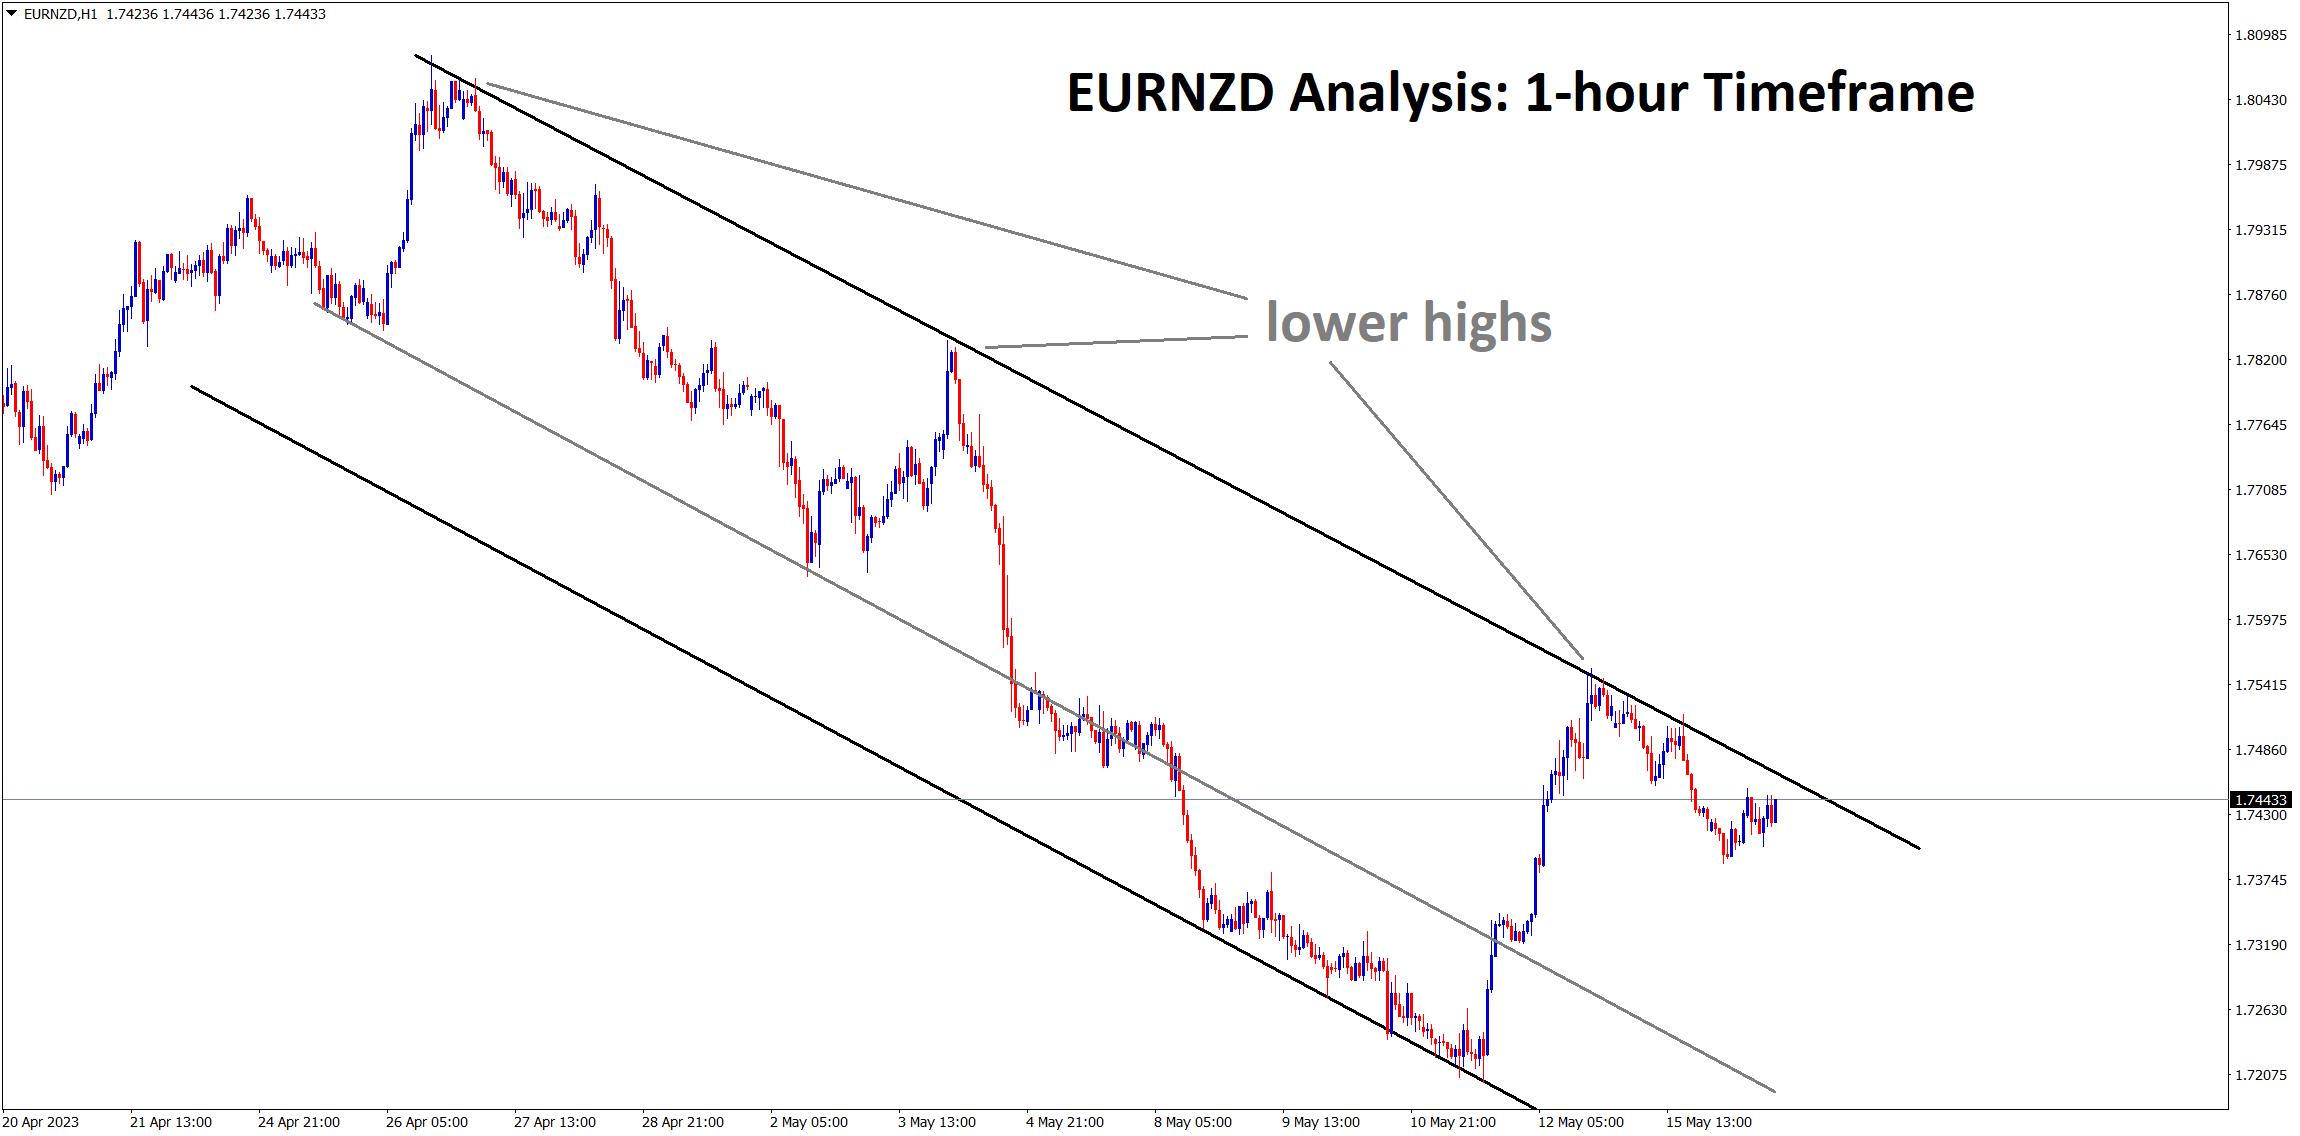 EURNZD falling from the lower high area of the downtrend line